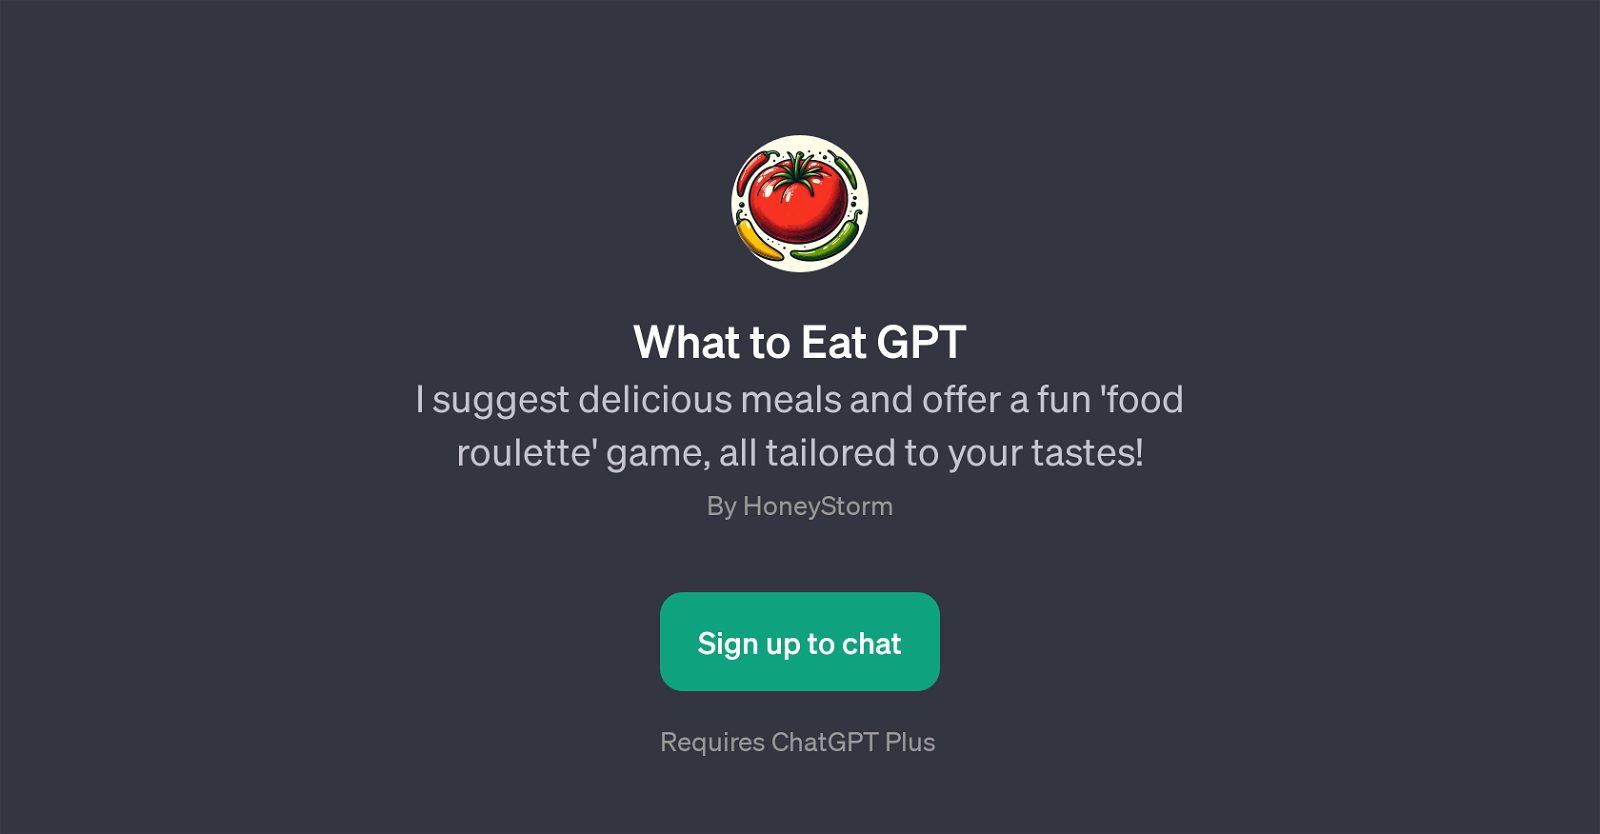 What to Eat GPT website